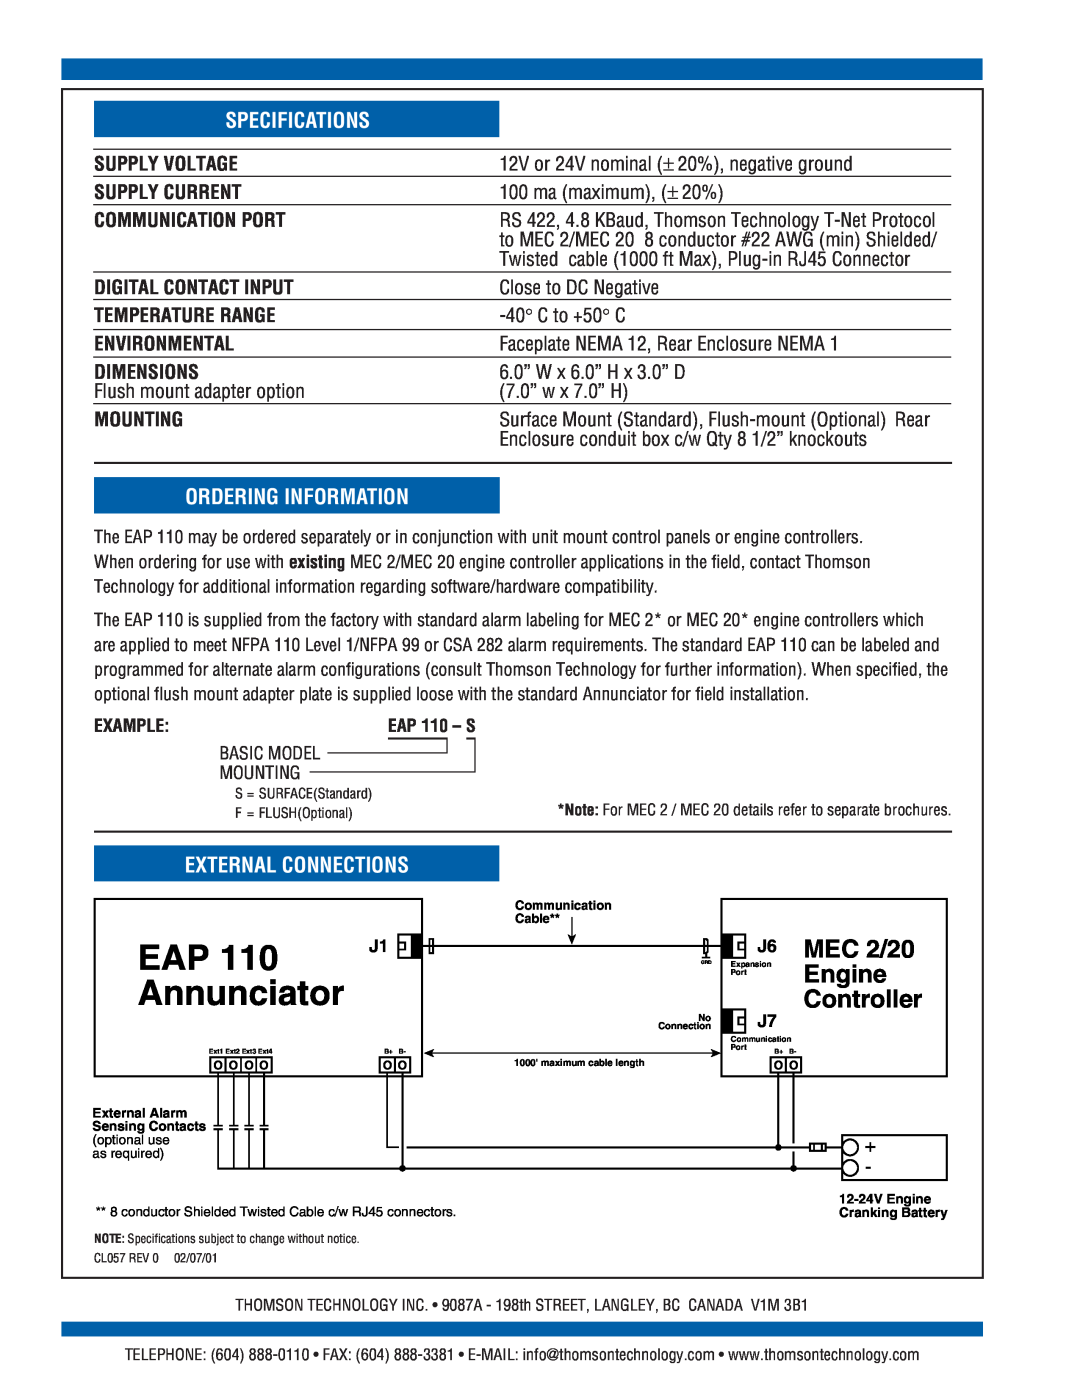 Technicolor - Thomson EAP 110 Specifications, Ordering Information, External Connections, Annunciator, Supply Voltage 